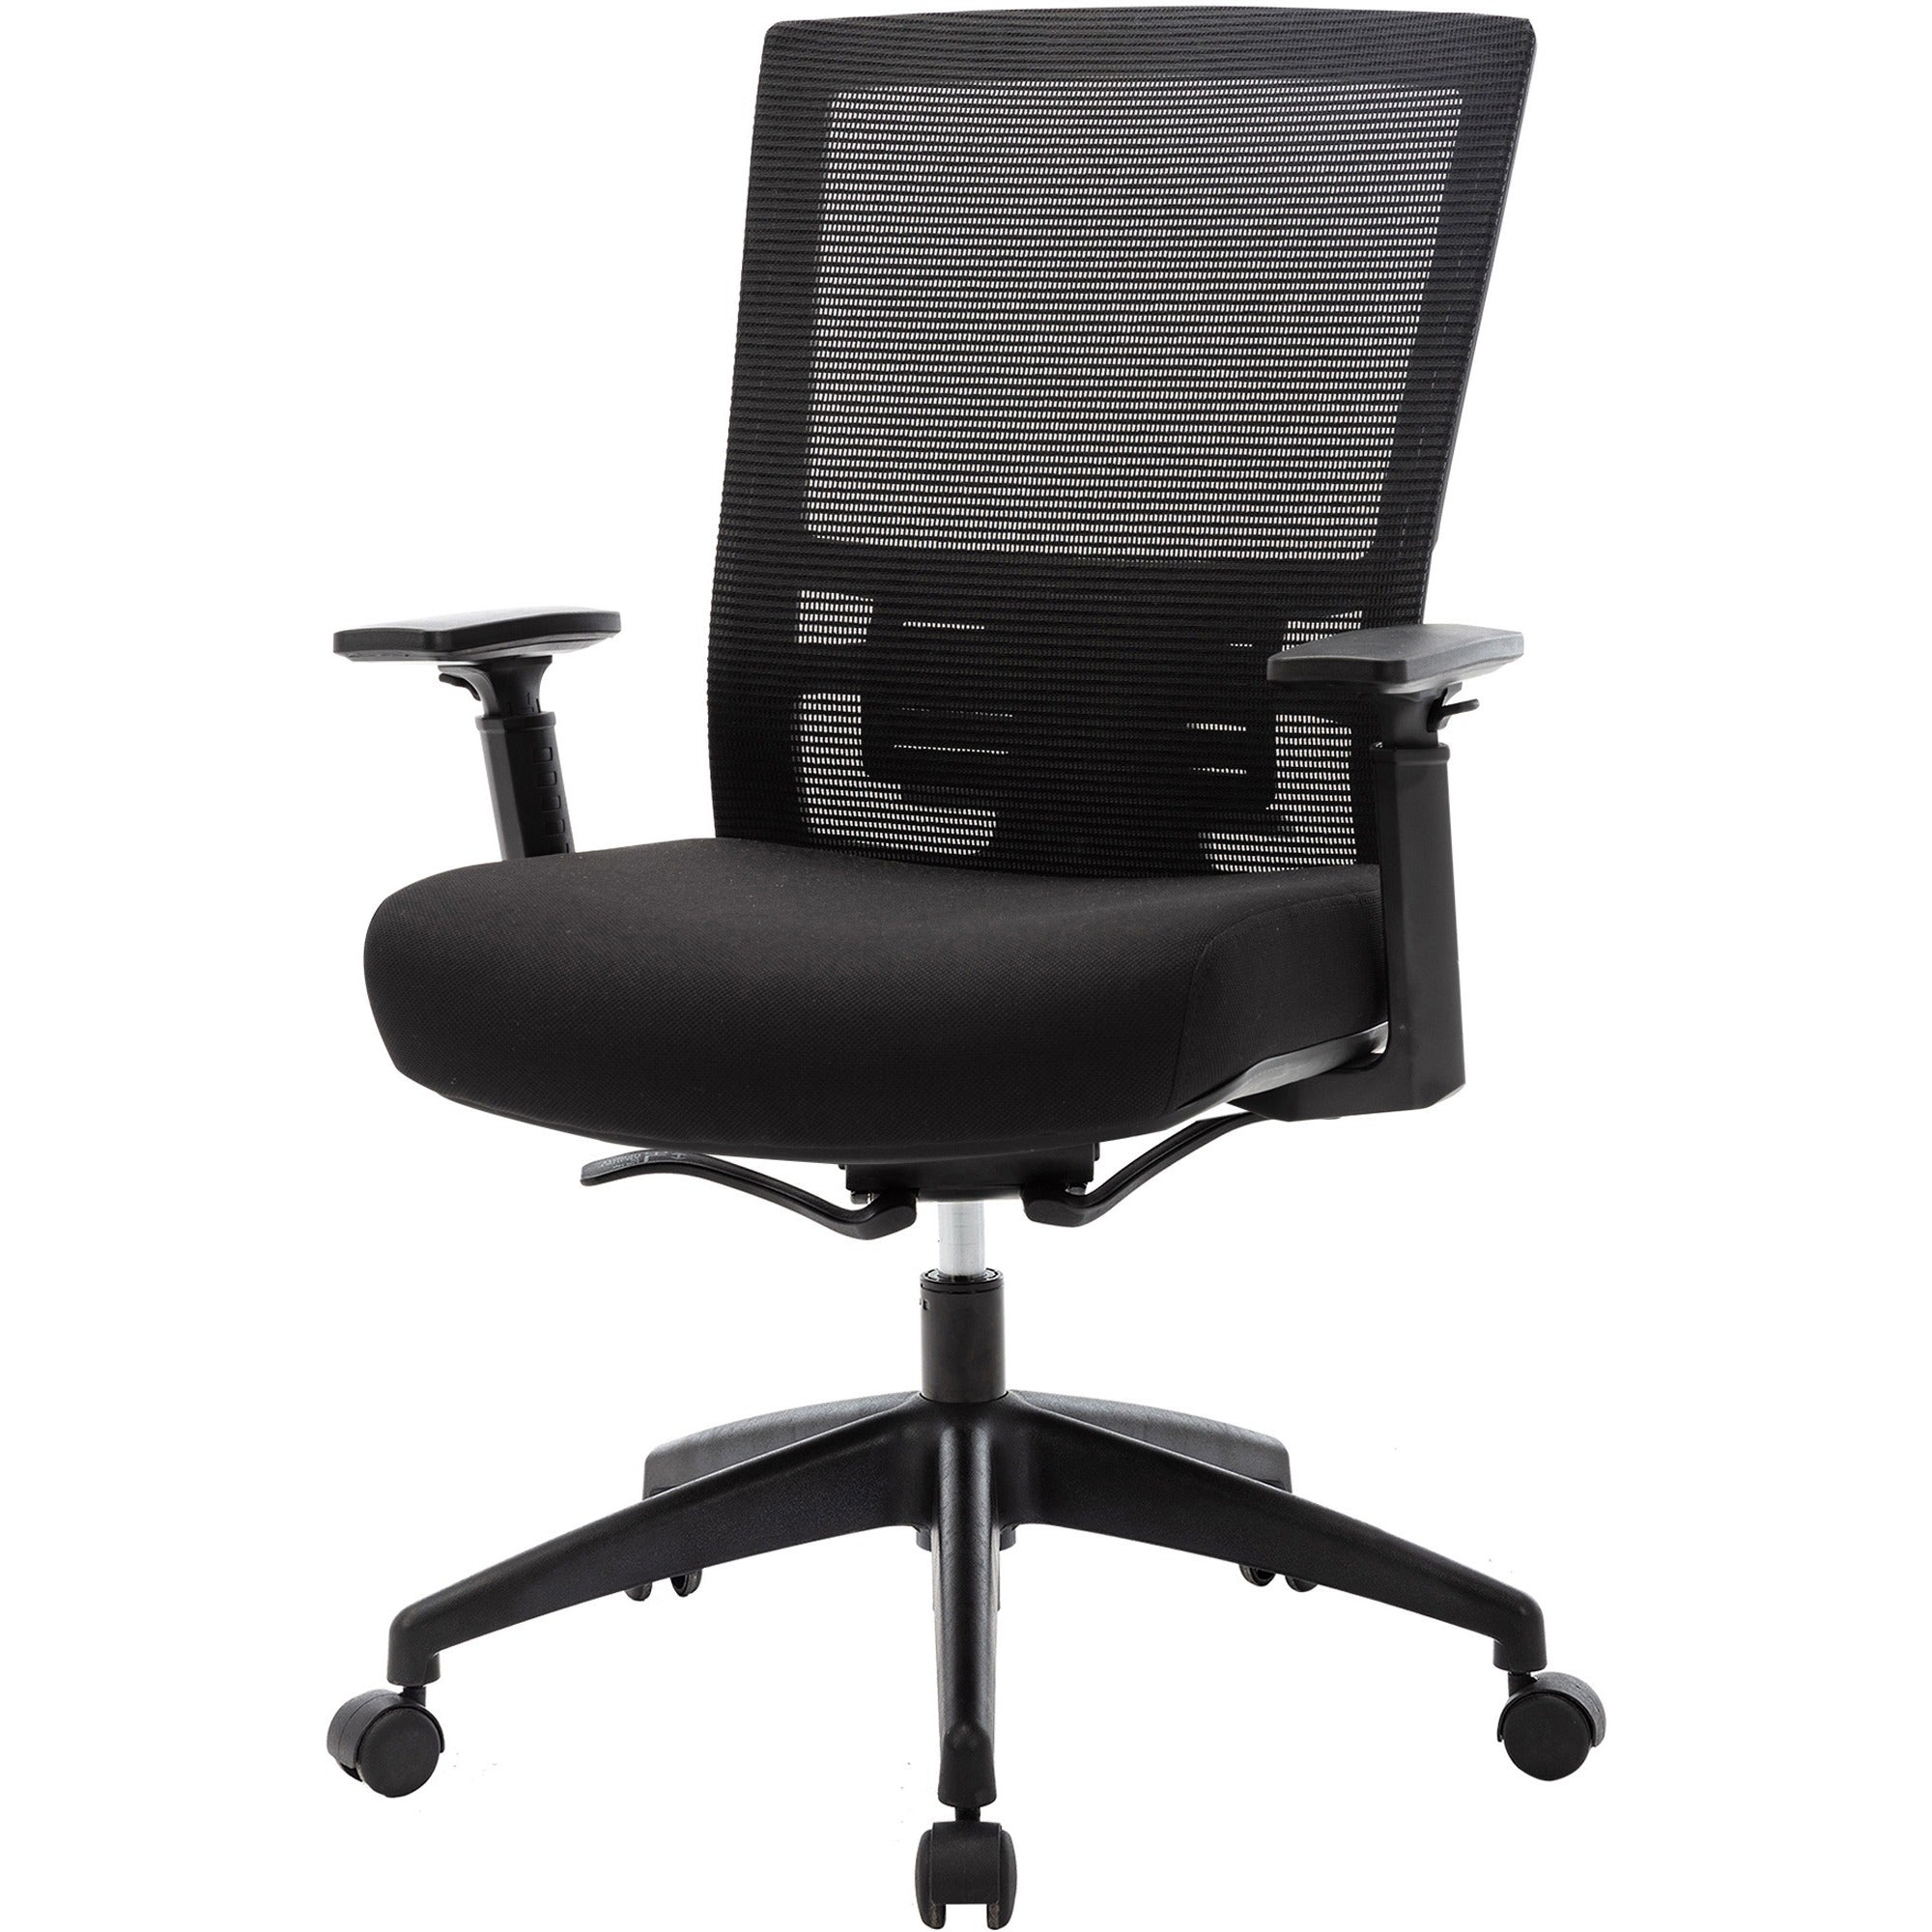 lorell-mesh-mid-back-office-chair-fabric-seat-mid-back-5-star-base-black-1-each_llr62626 - 4